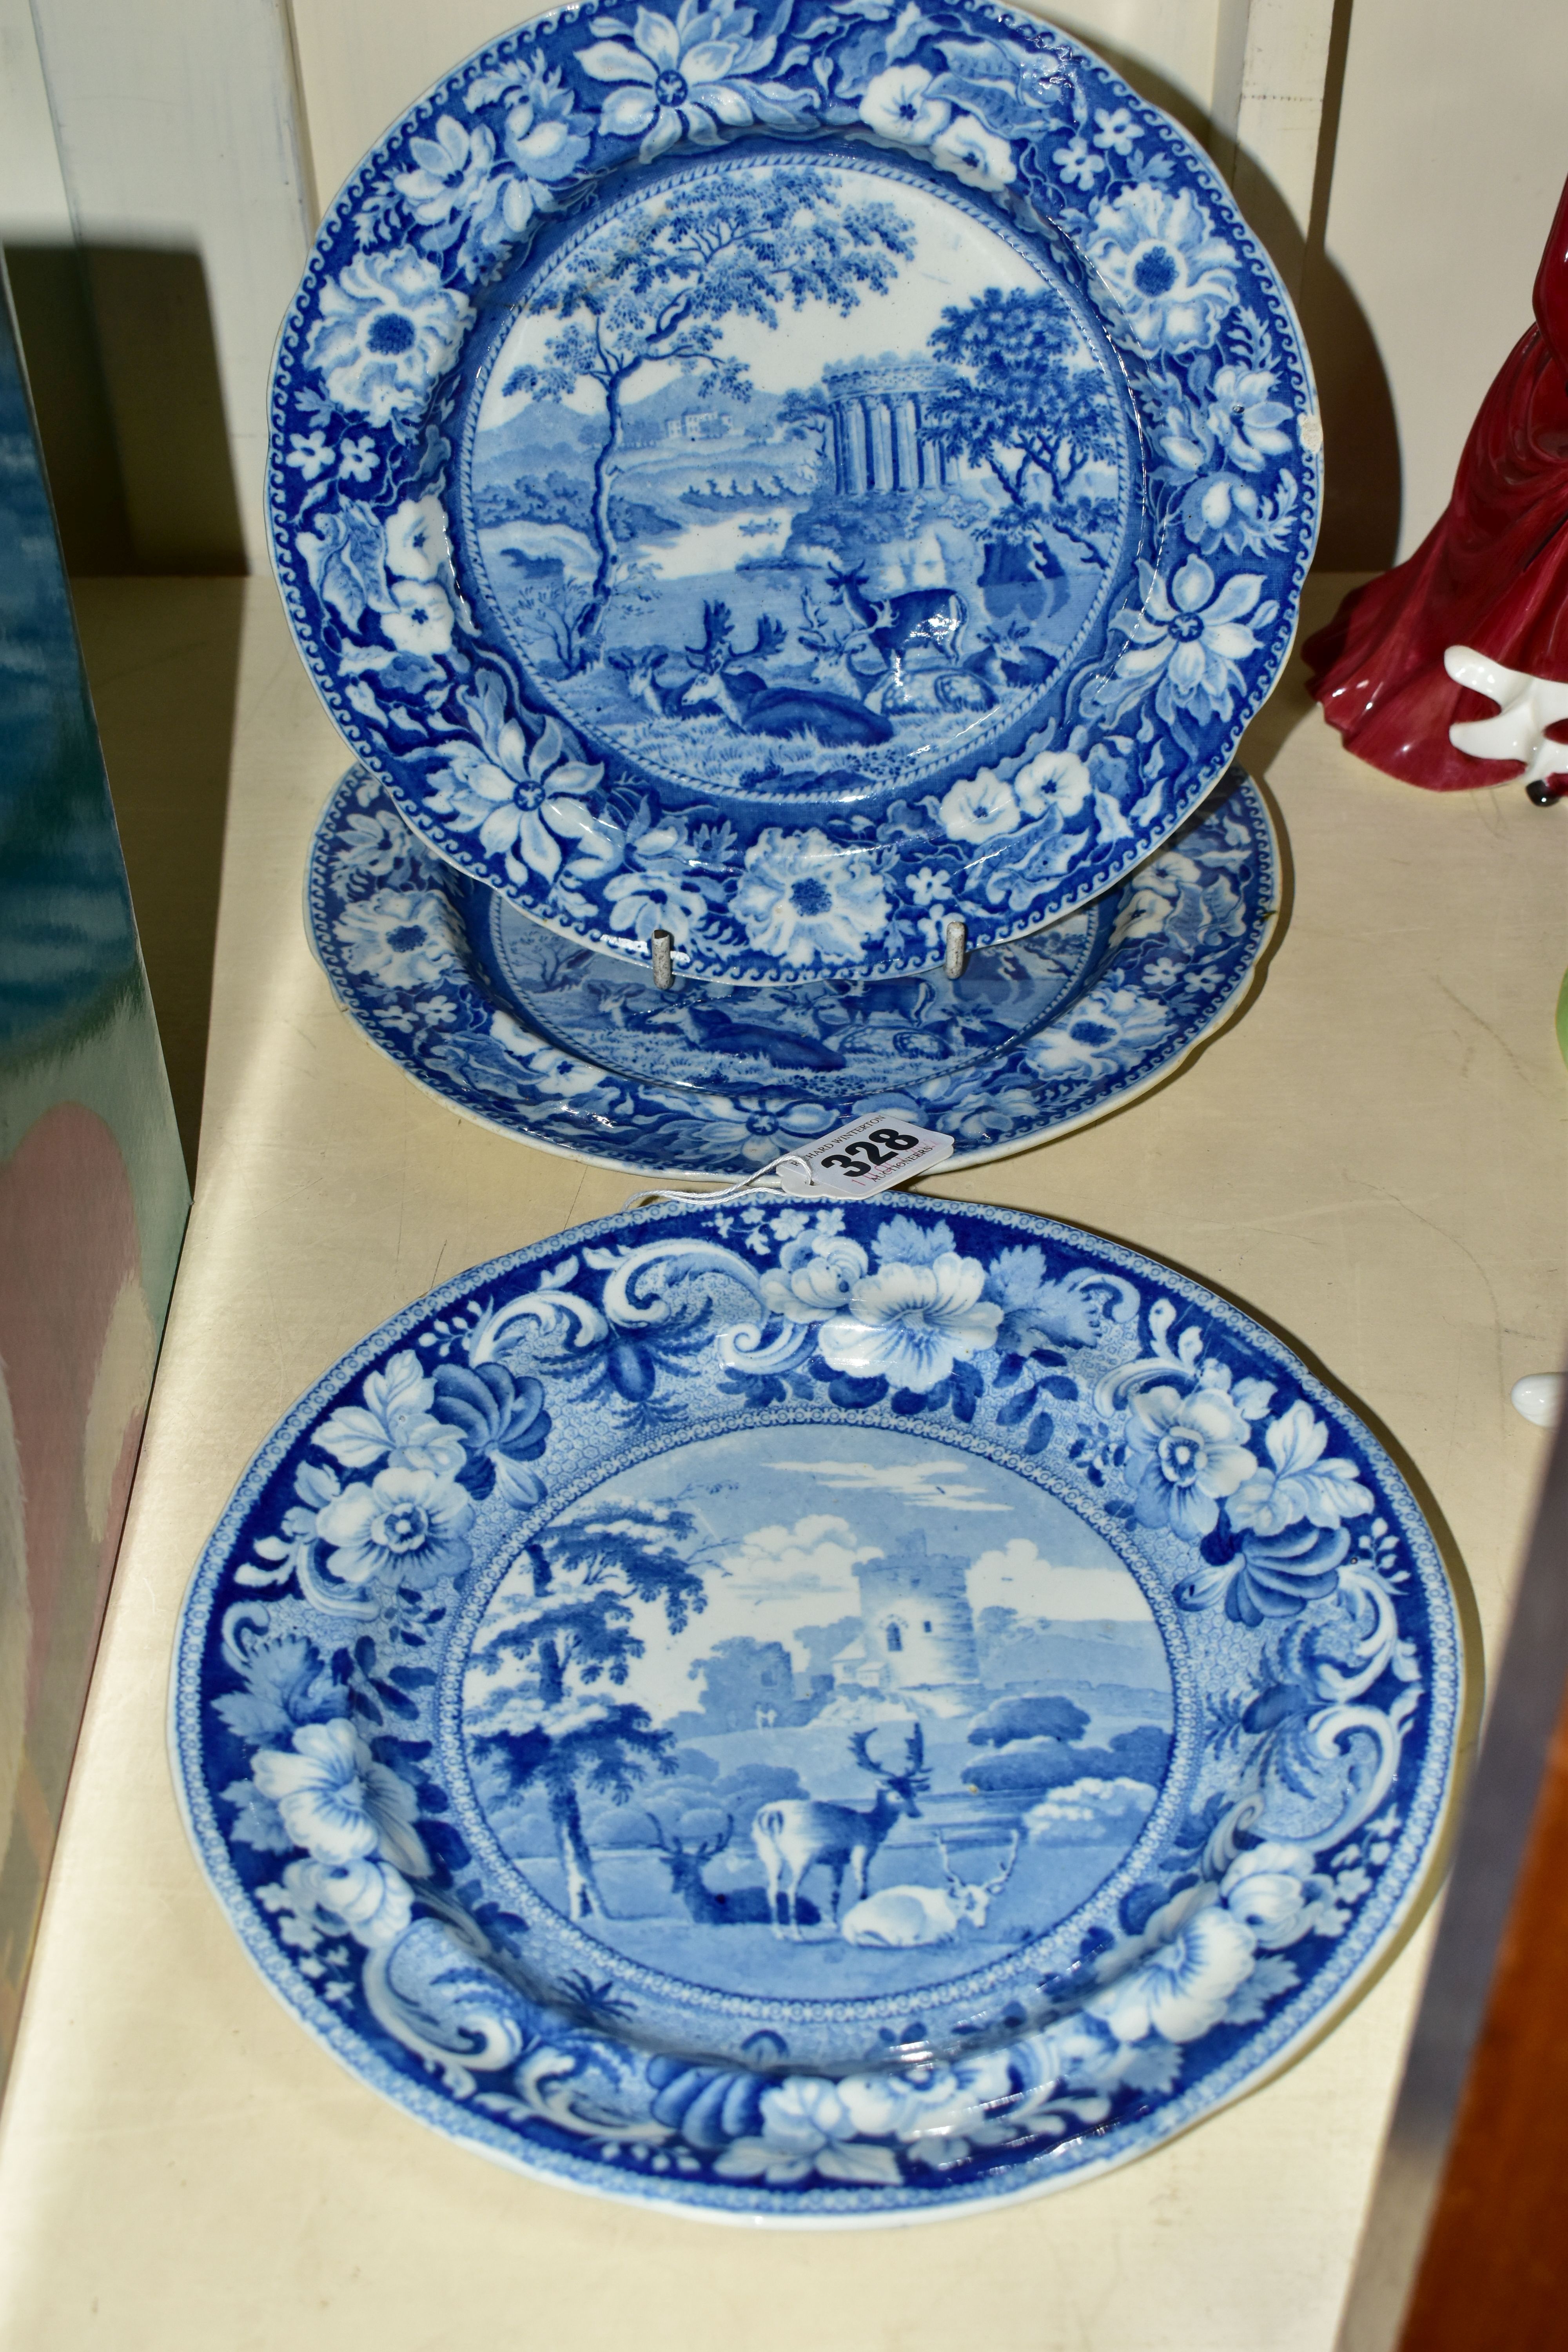 THREE SMALL NINETEENTH CENTURY BLUE AND WHITE PLATES, transfer printed with deer in the landscape,